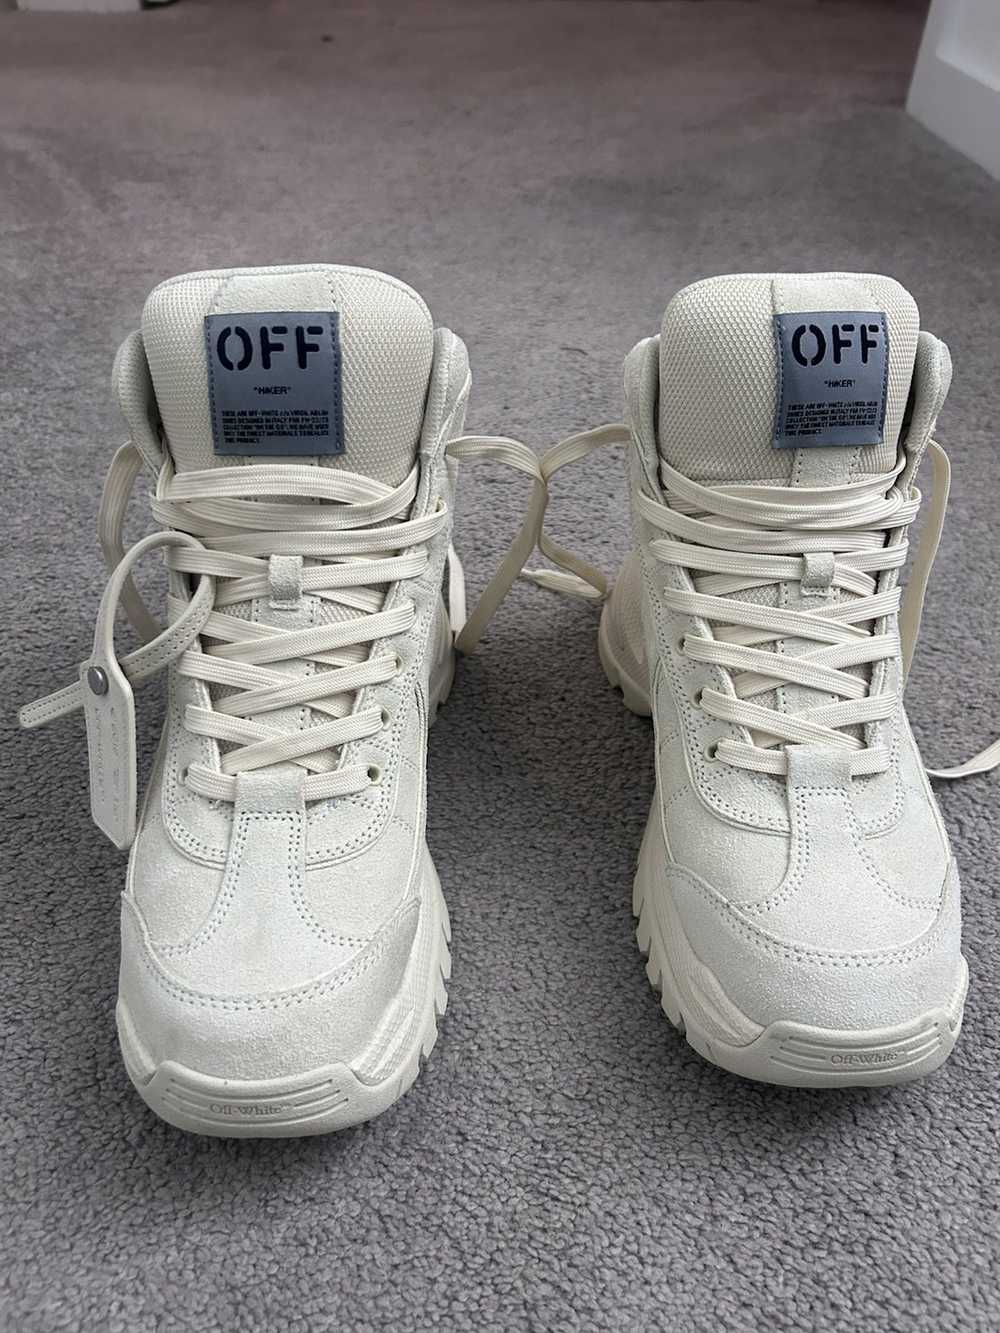 Off-White Hiker High Top Sneakers - image 1